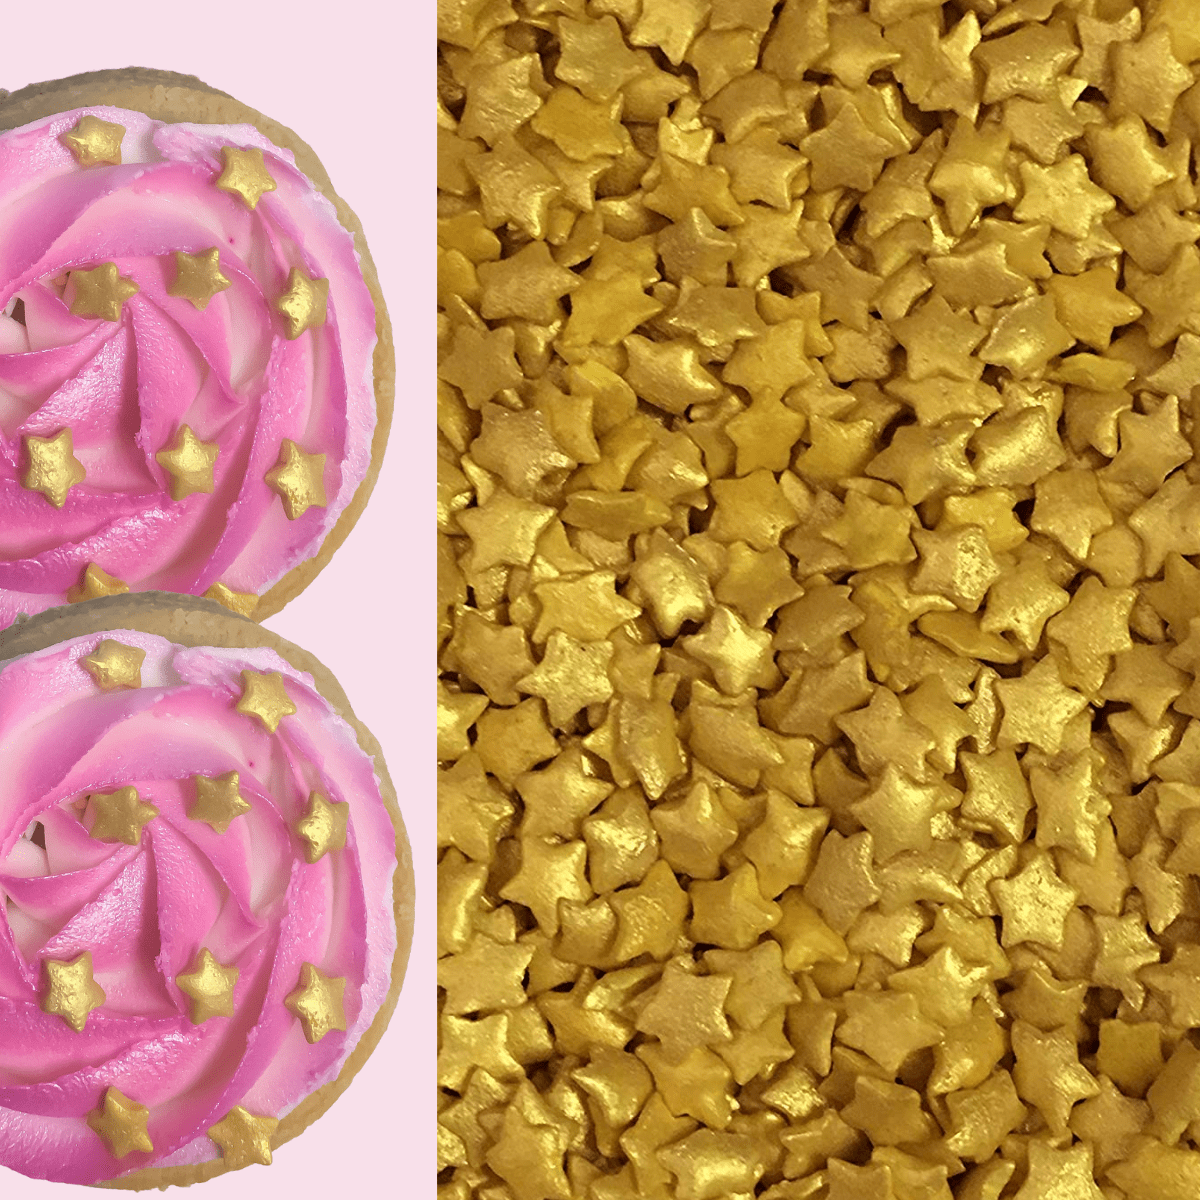 Rainbow Dust Edible Pink Heart Cake Glitter Topping Decorations Sprinkles 